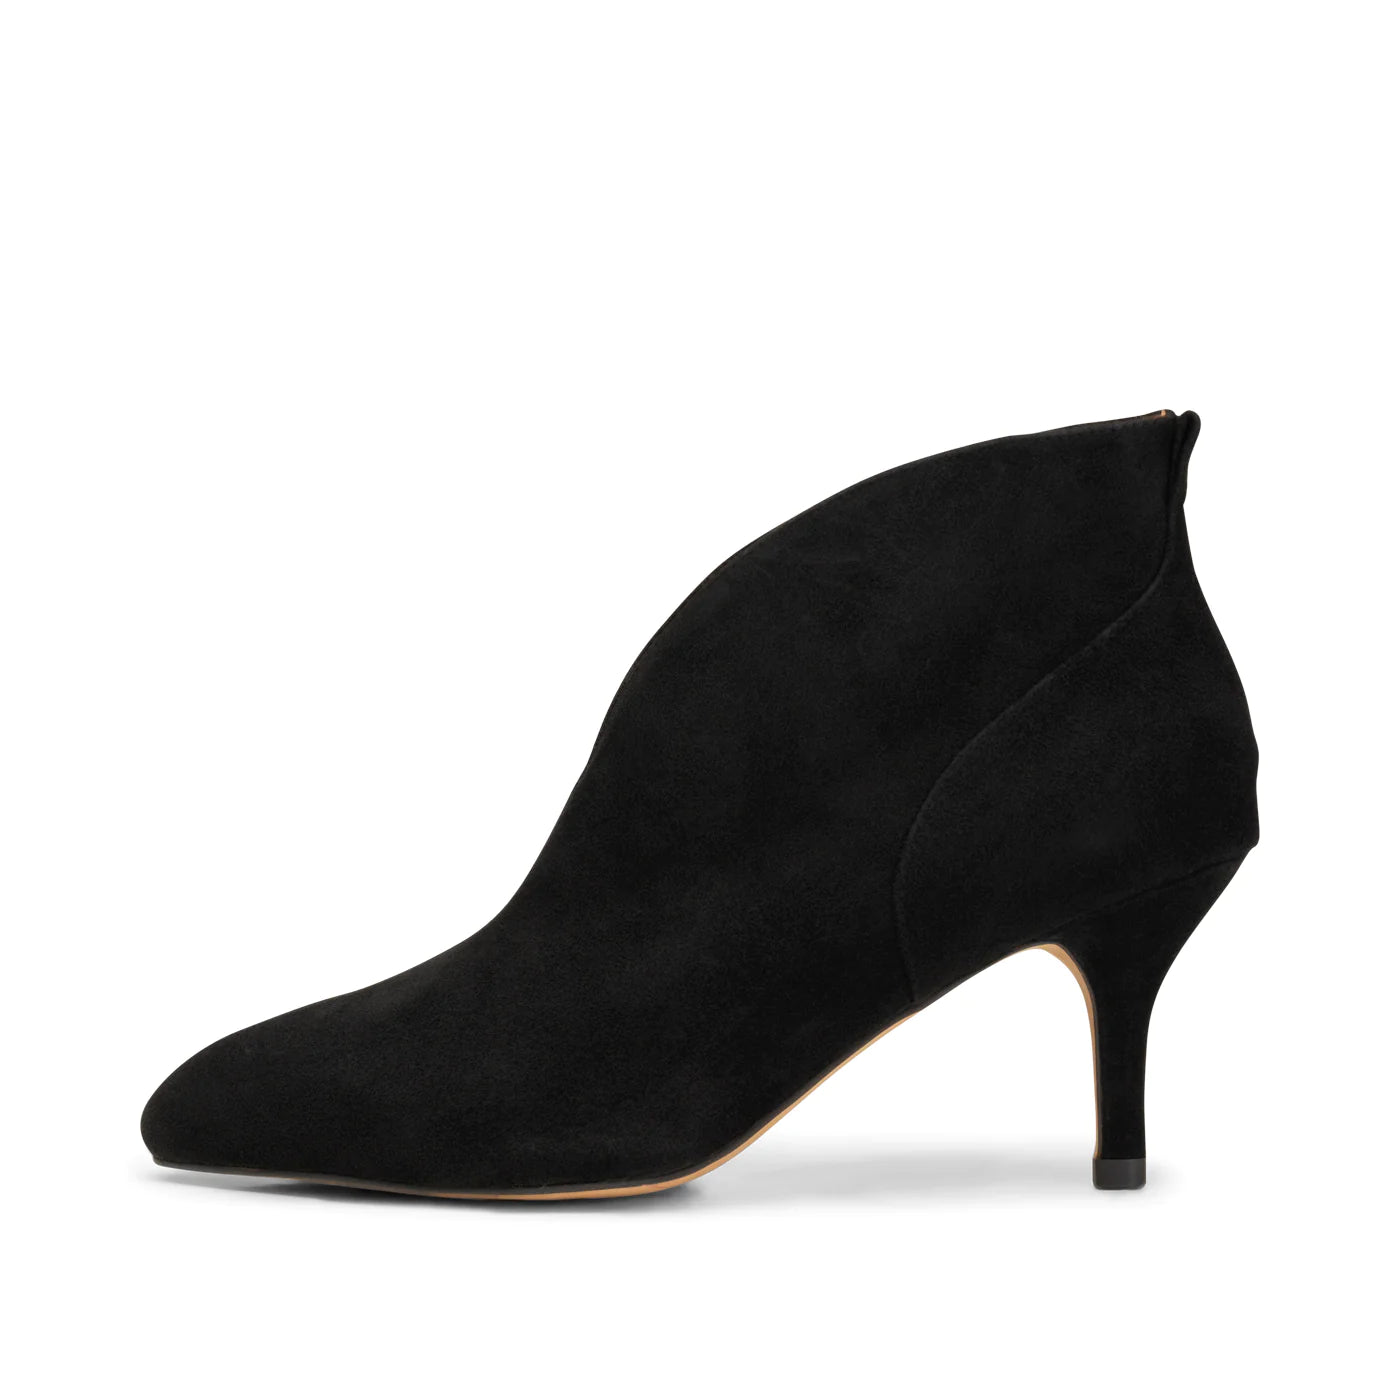 Valentine Suede in Black by Shoe The Bear